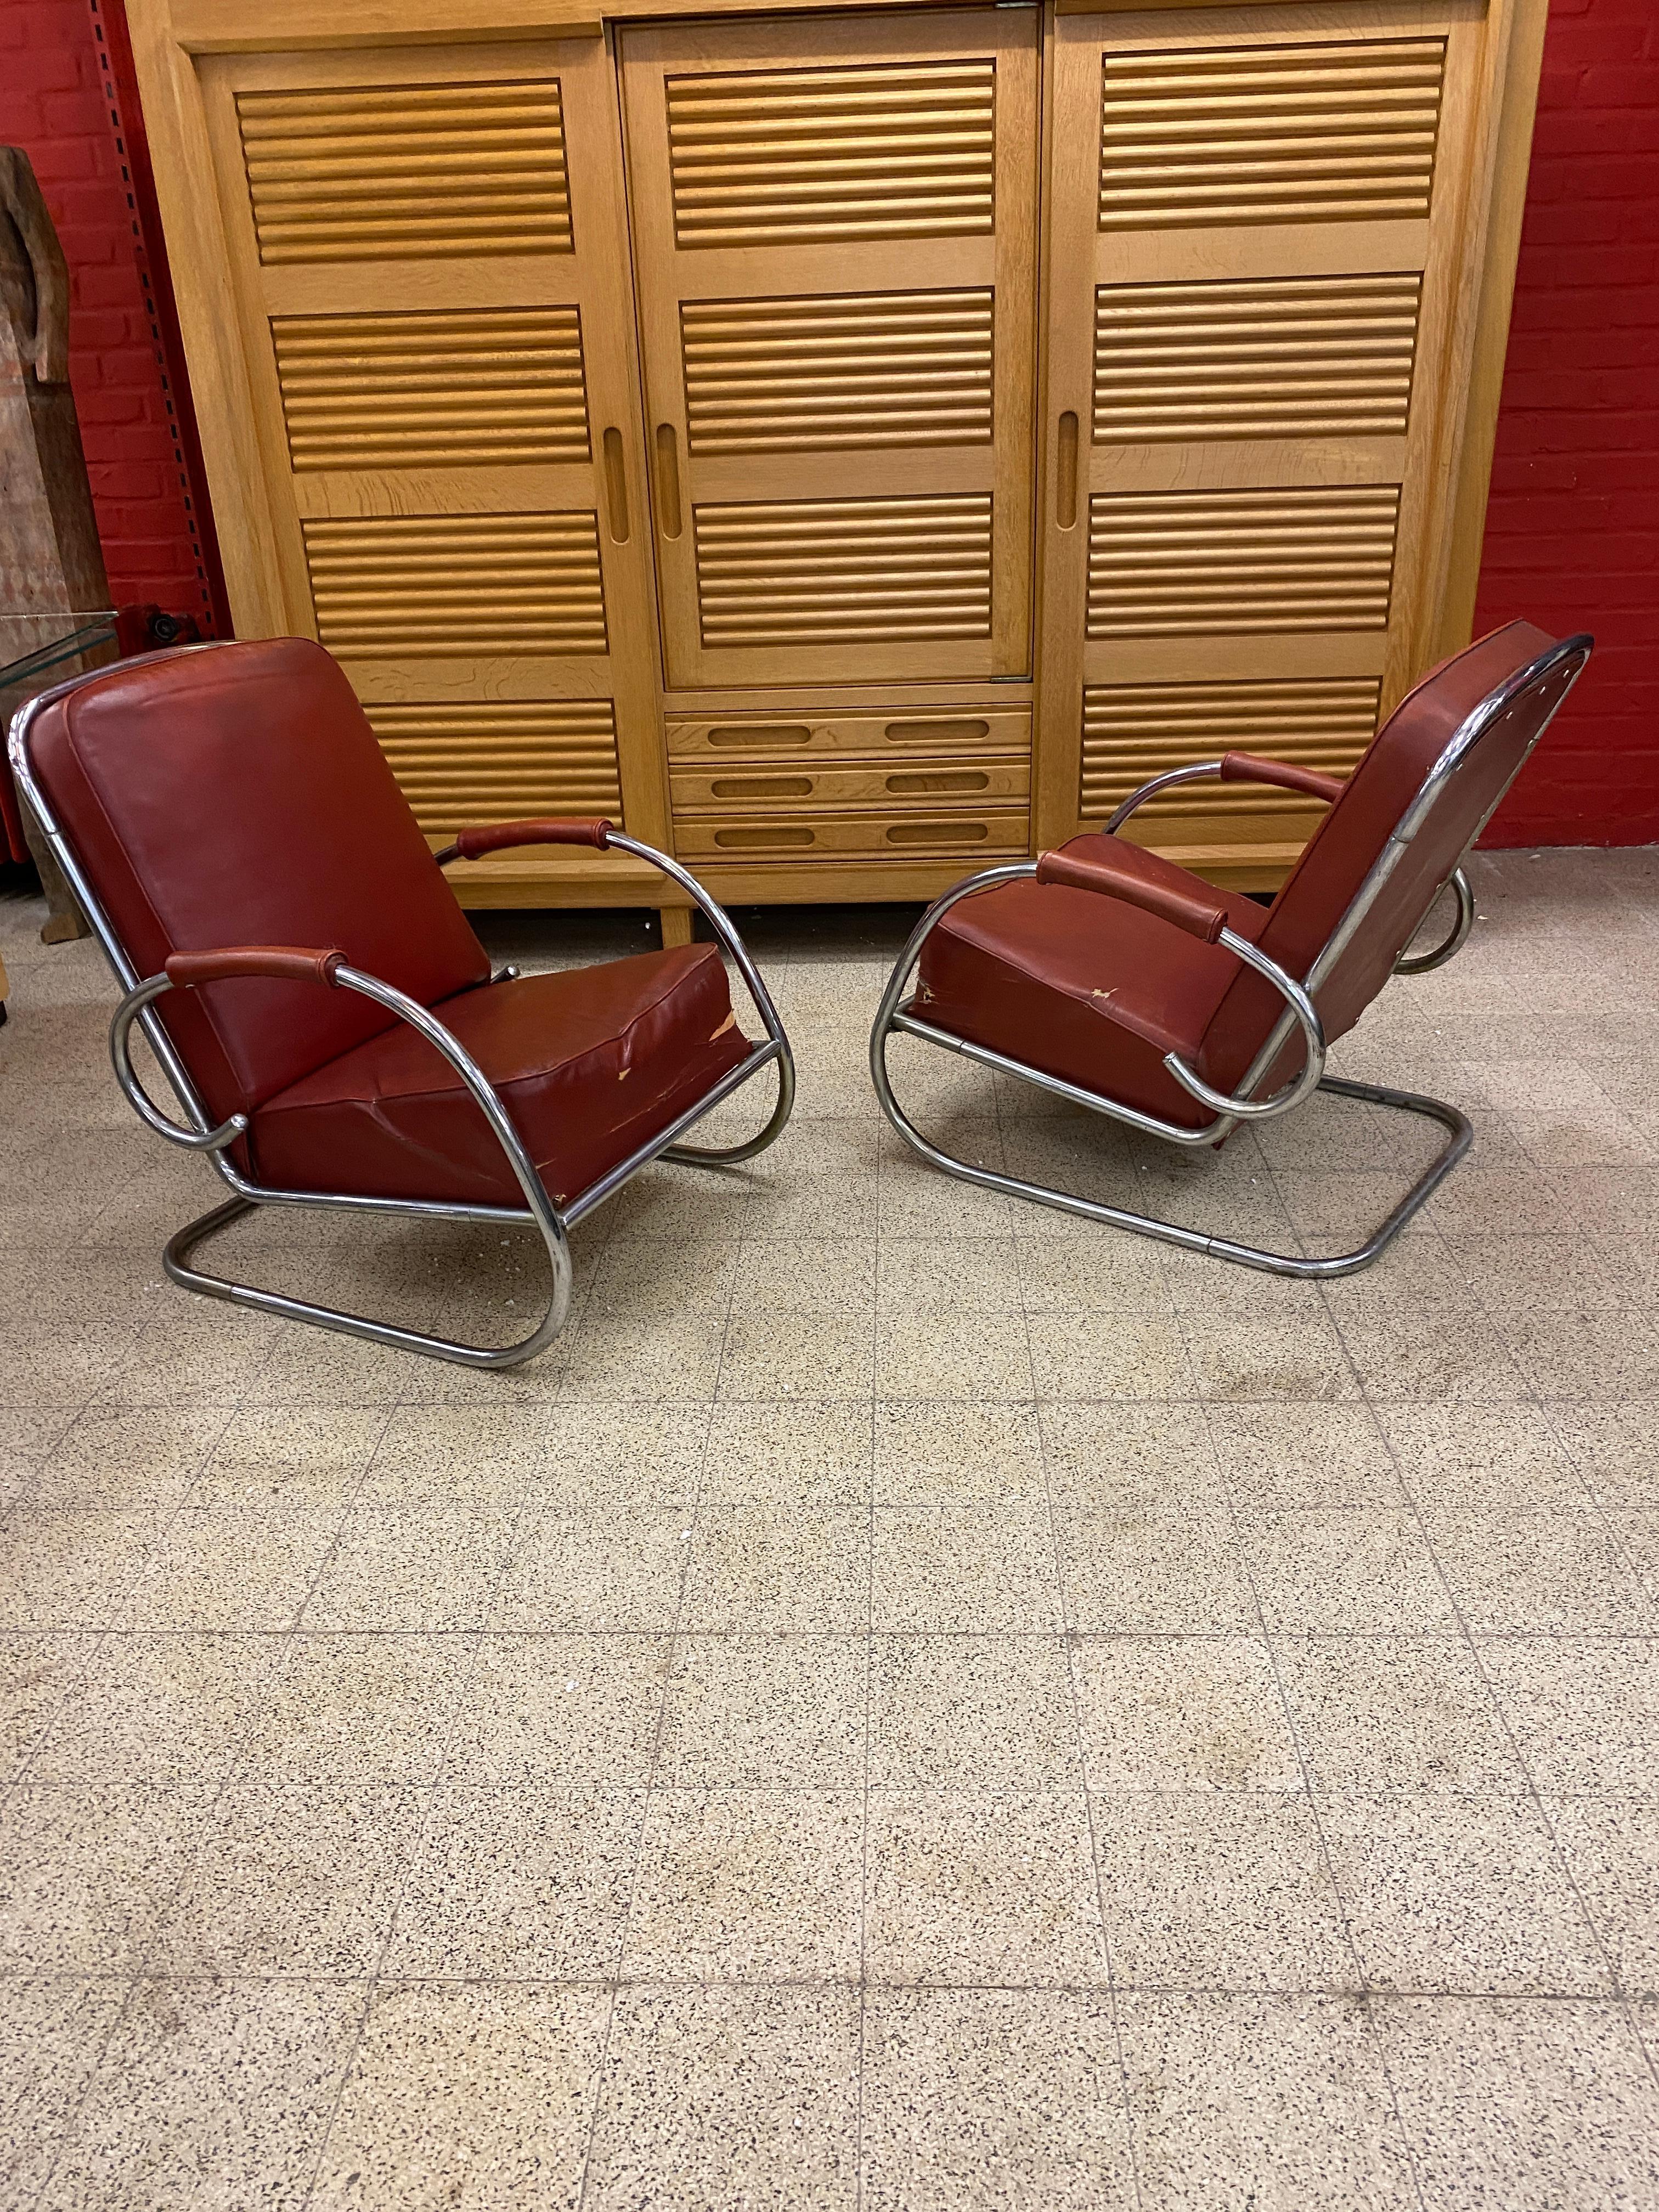 2 Modernist Art Deco Armchairs in Chromed Metal and Faux Leather circa 1920-1930 For Sale 2